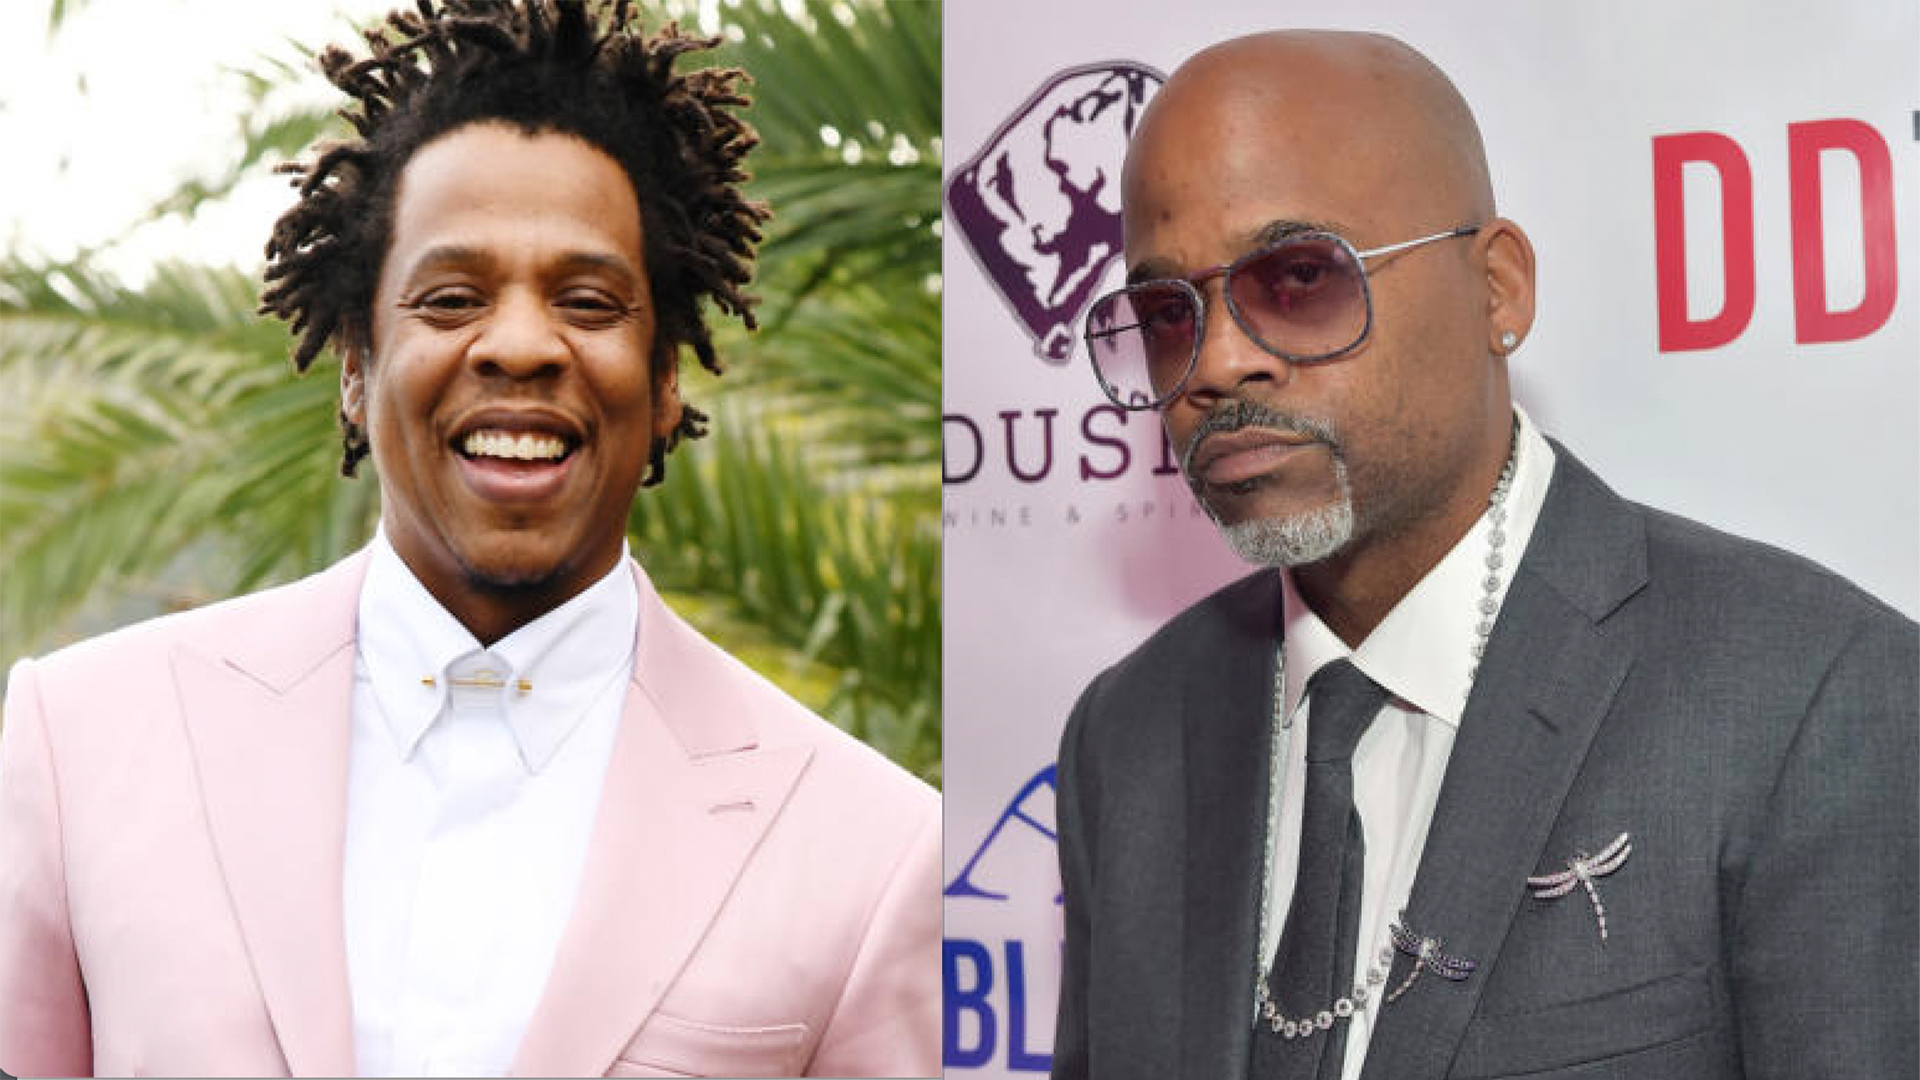 Dame Dash On His Friendship With Jay-Z And The Music Business — 'They Make One Sell Out The Other, Divide And Conquer'